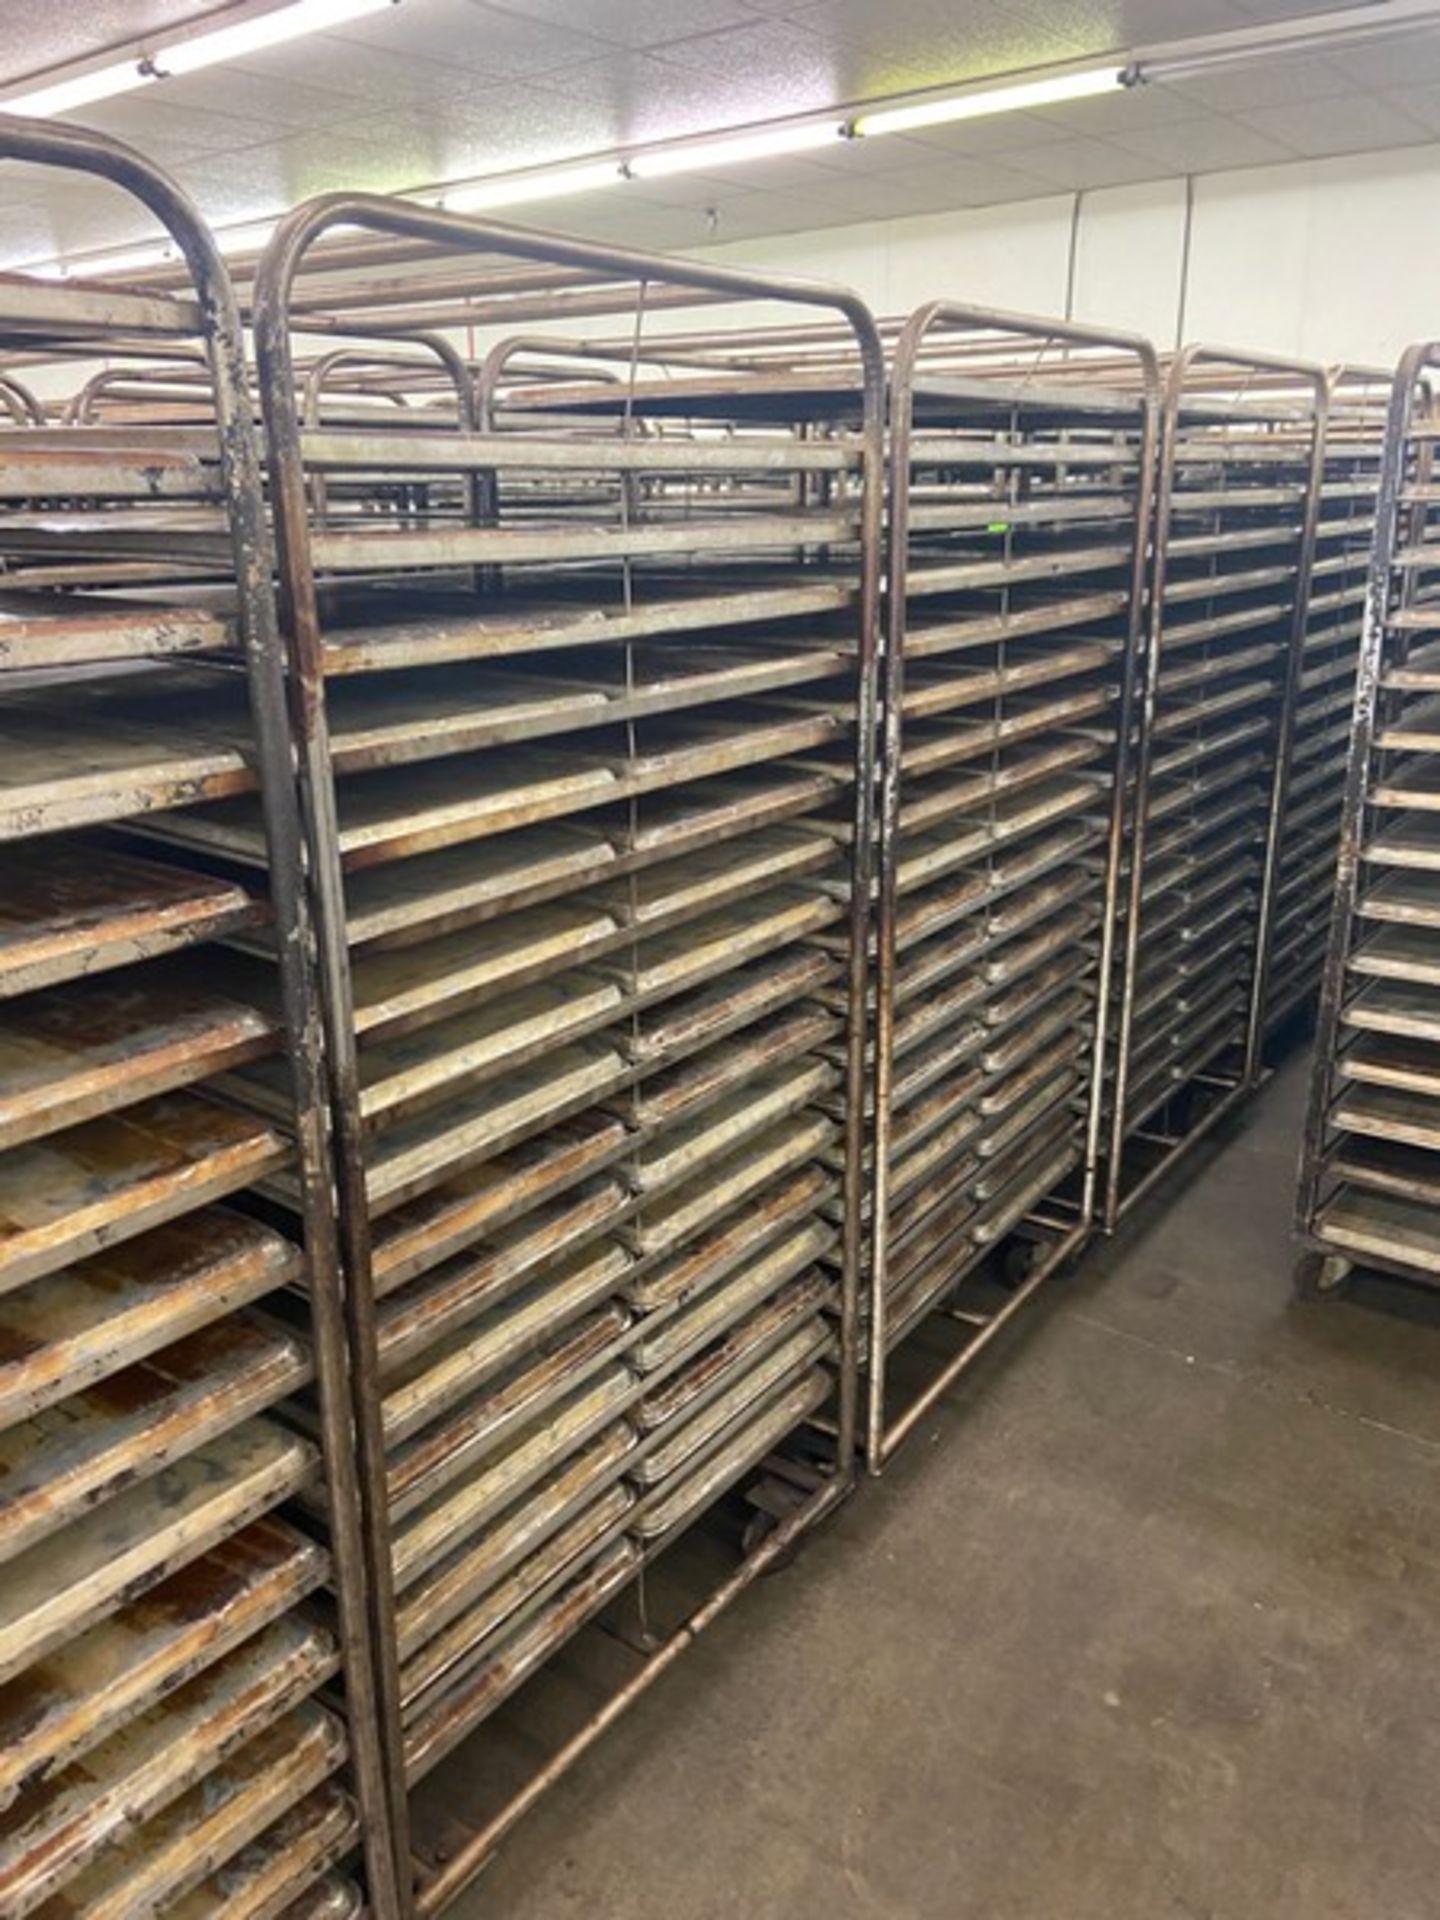 (9) PORTABLE DOUBLE SIDED BAKING PAN RACKS, MOUNTED ON CASTERS (LOCATED IN HERMITAGE, PA) - Image 3 of 4